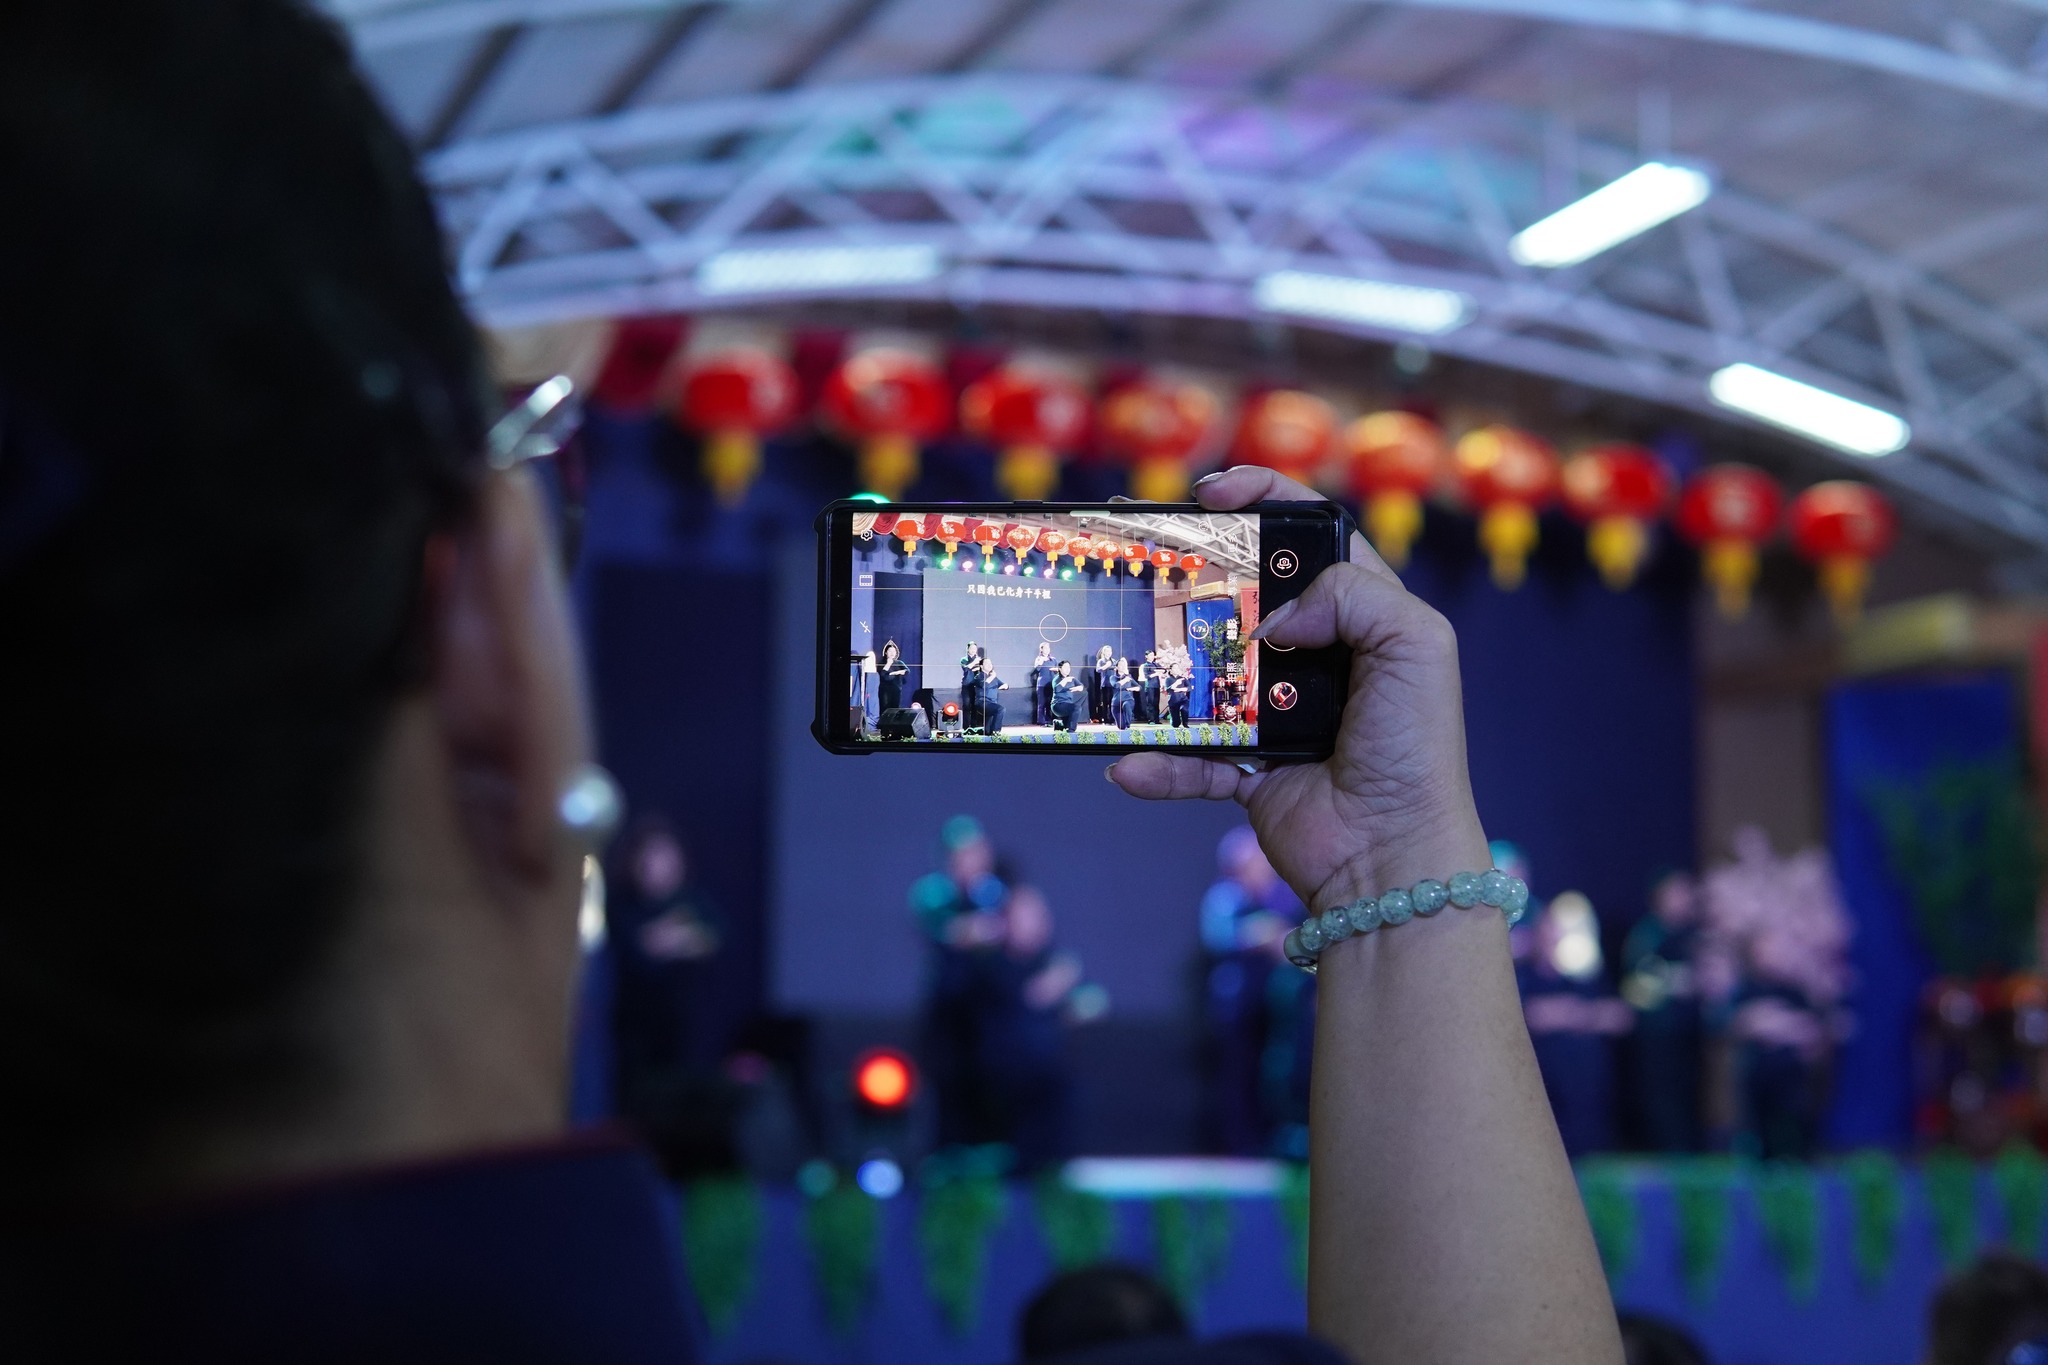 A proud mother, Tzu Chi Commissioner, Sis. Michelle Hsu captures video of the Tzu Chi Youths' performance.【Photo by Tzu Chi Davao】